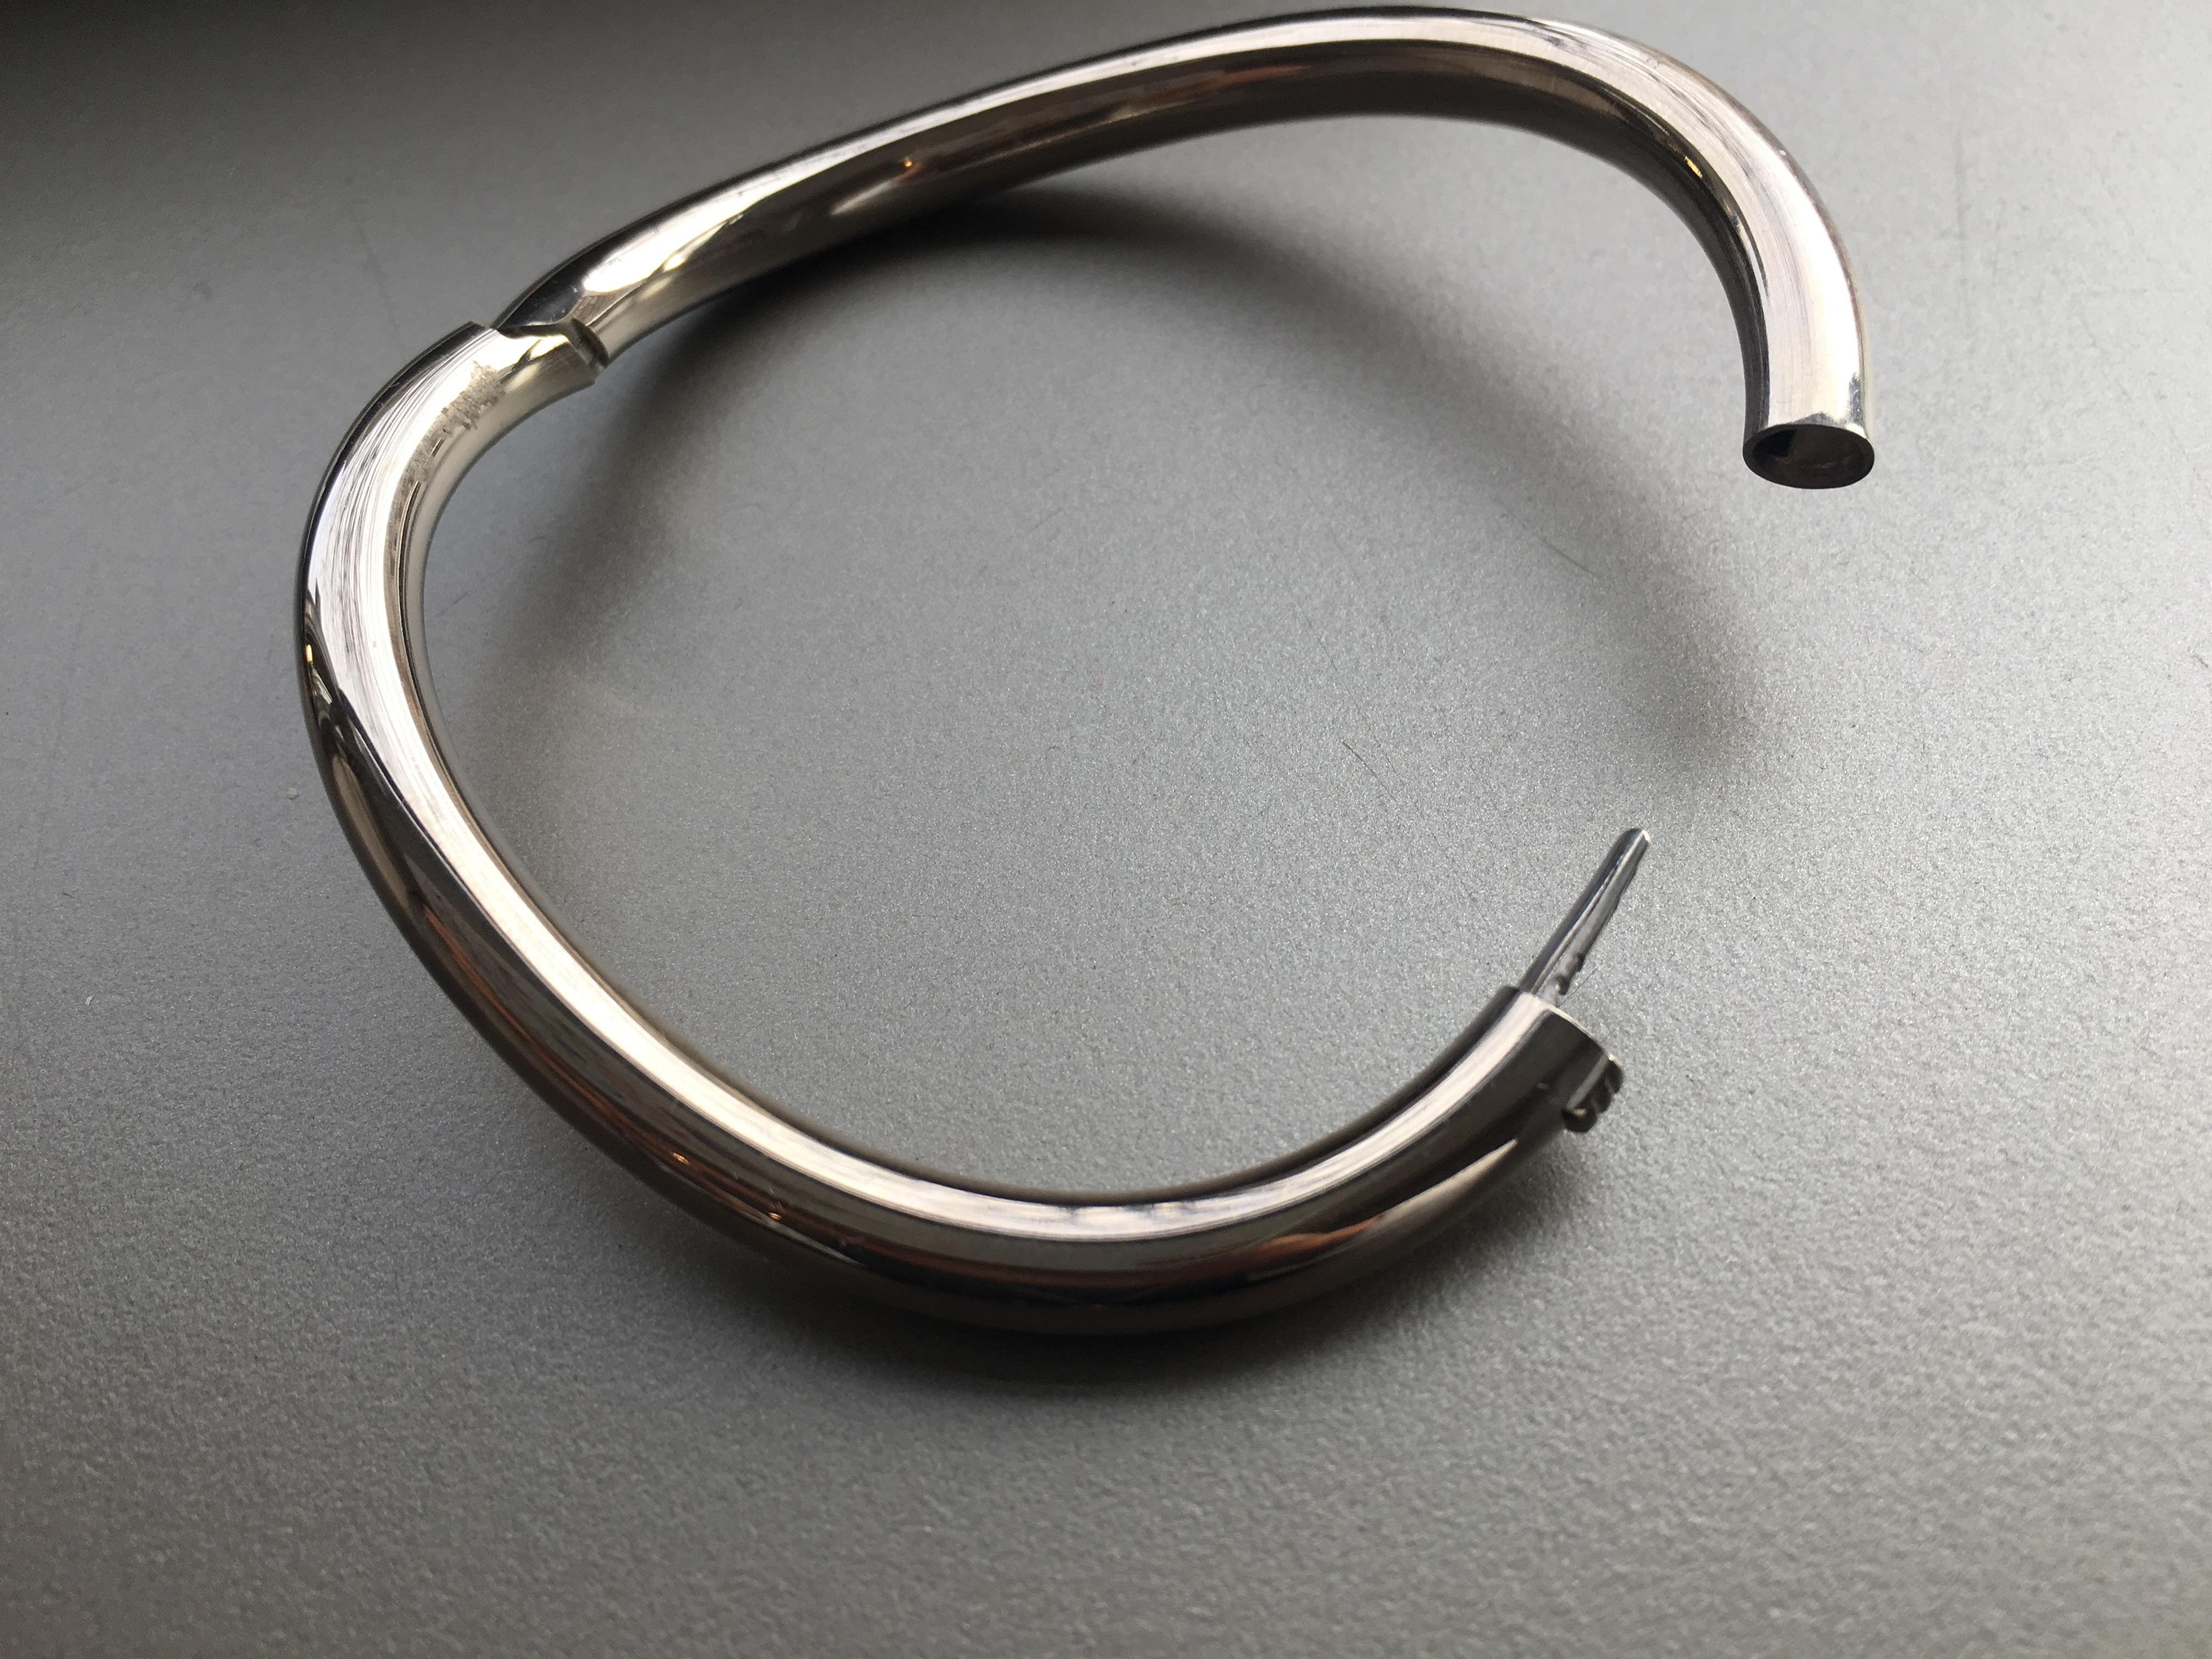 A contemporary design bangle in 18 karat white gold with a wave design.

A simple yet elegant bracelet made with utmost precision in Germany.  The handmade catch is almost invisible and very secure.  This sleek contemporary bangle will complement